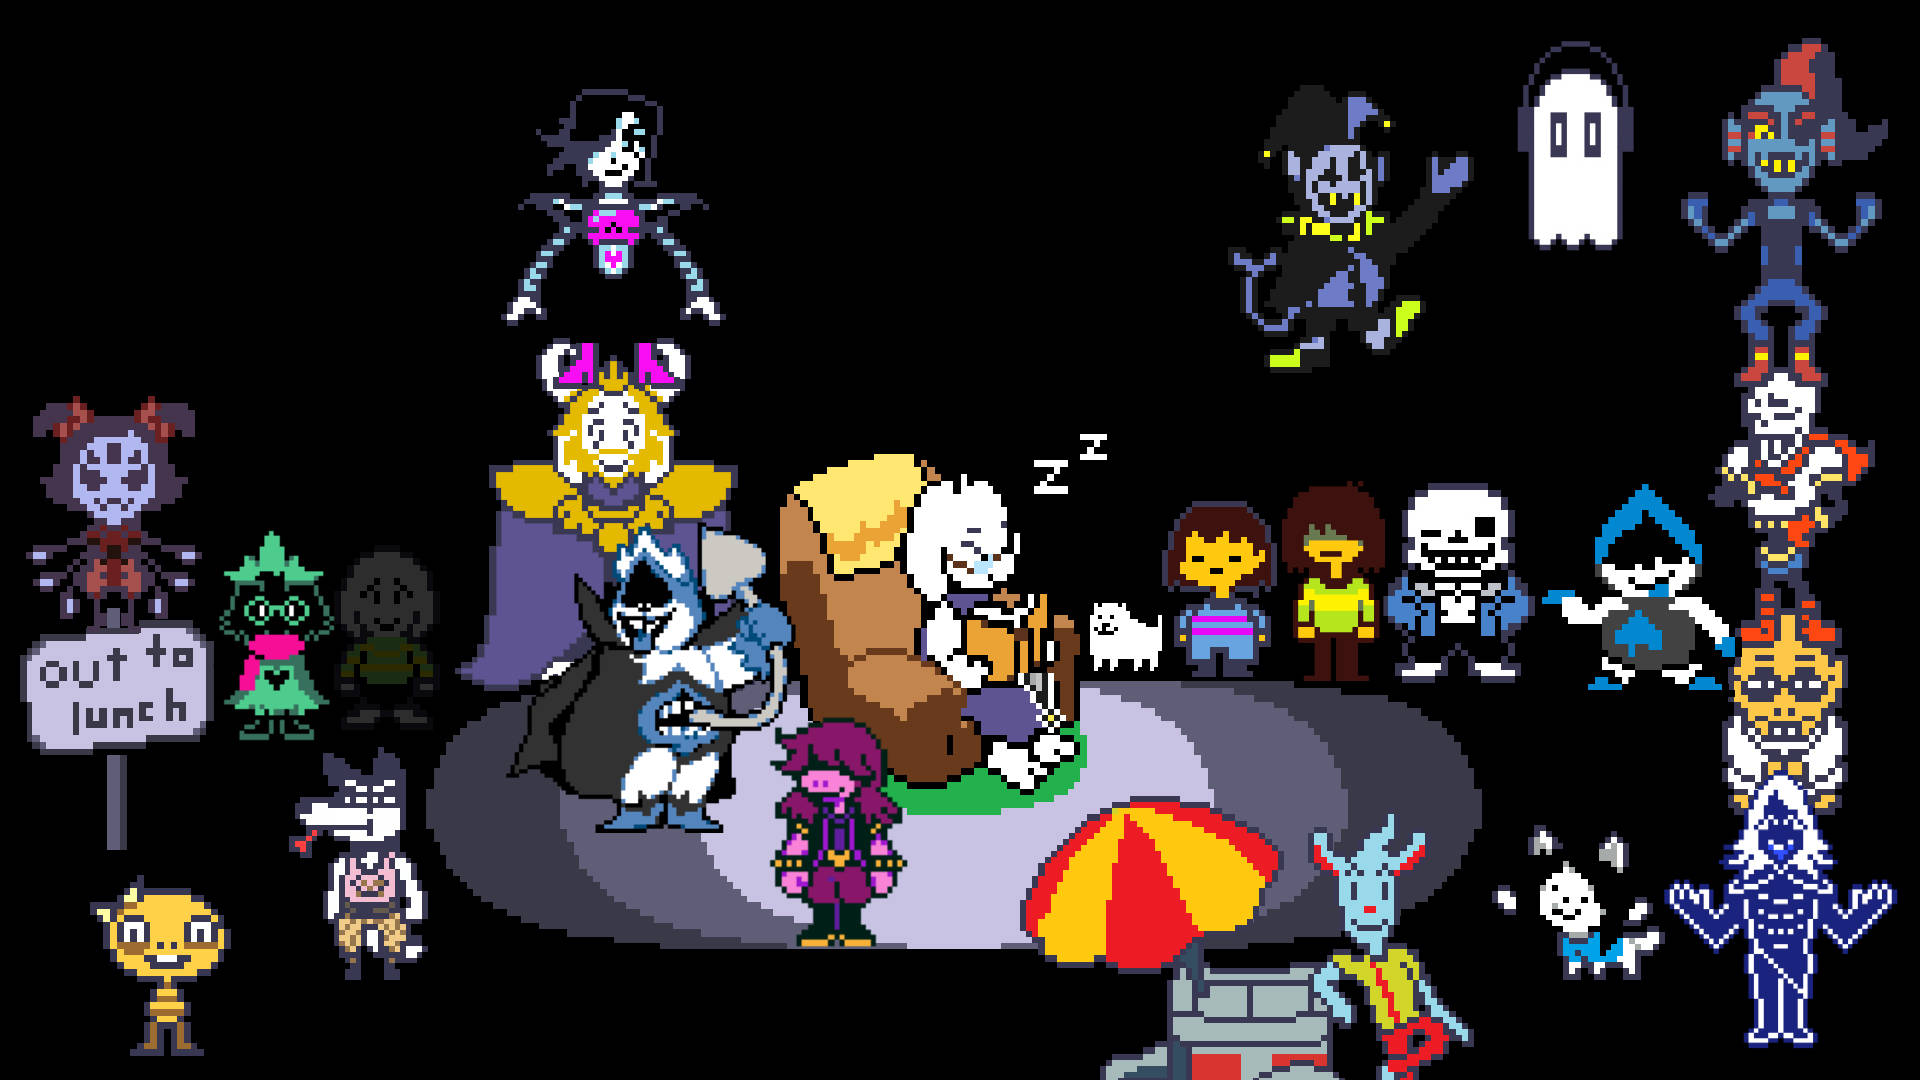 Undertale And Deltarune Characters